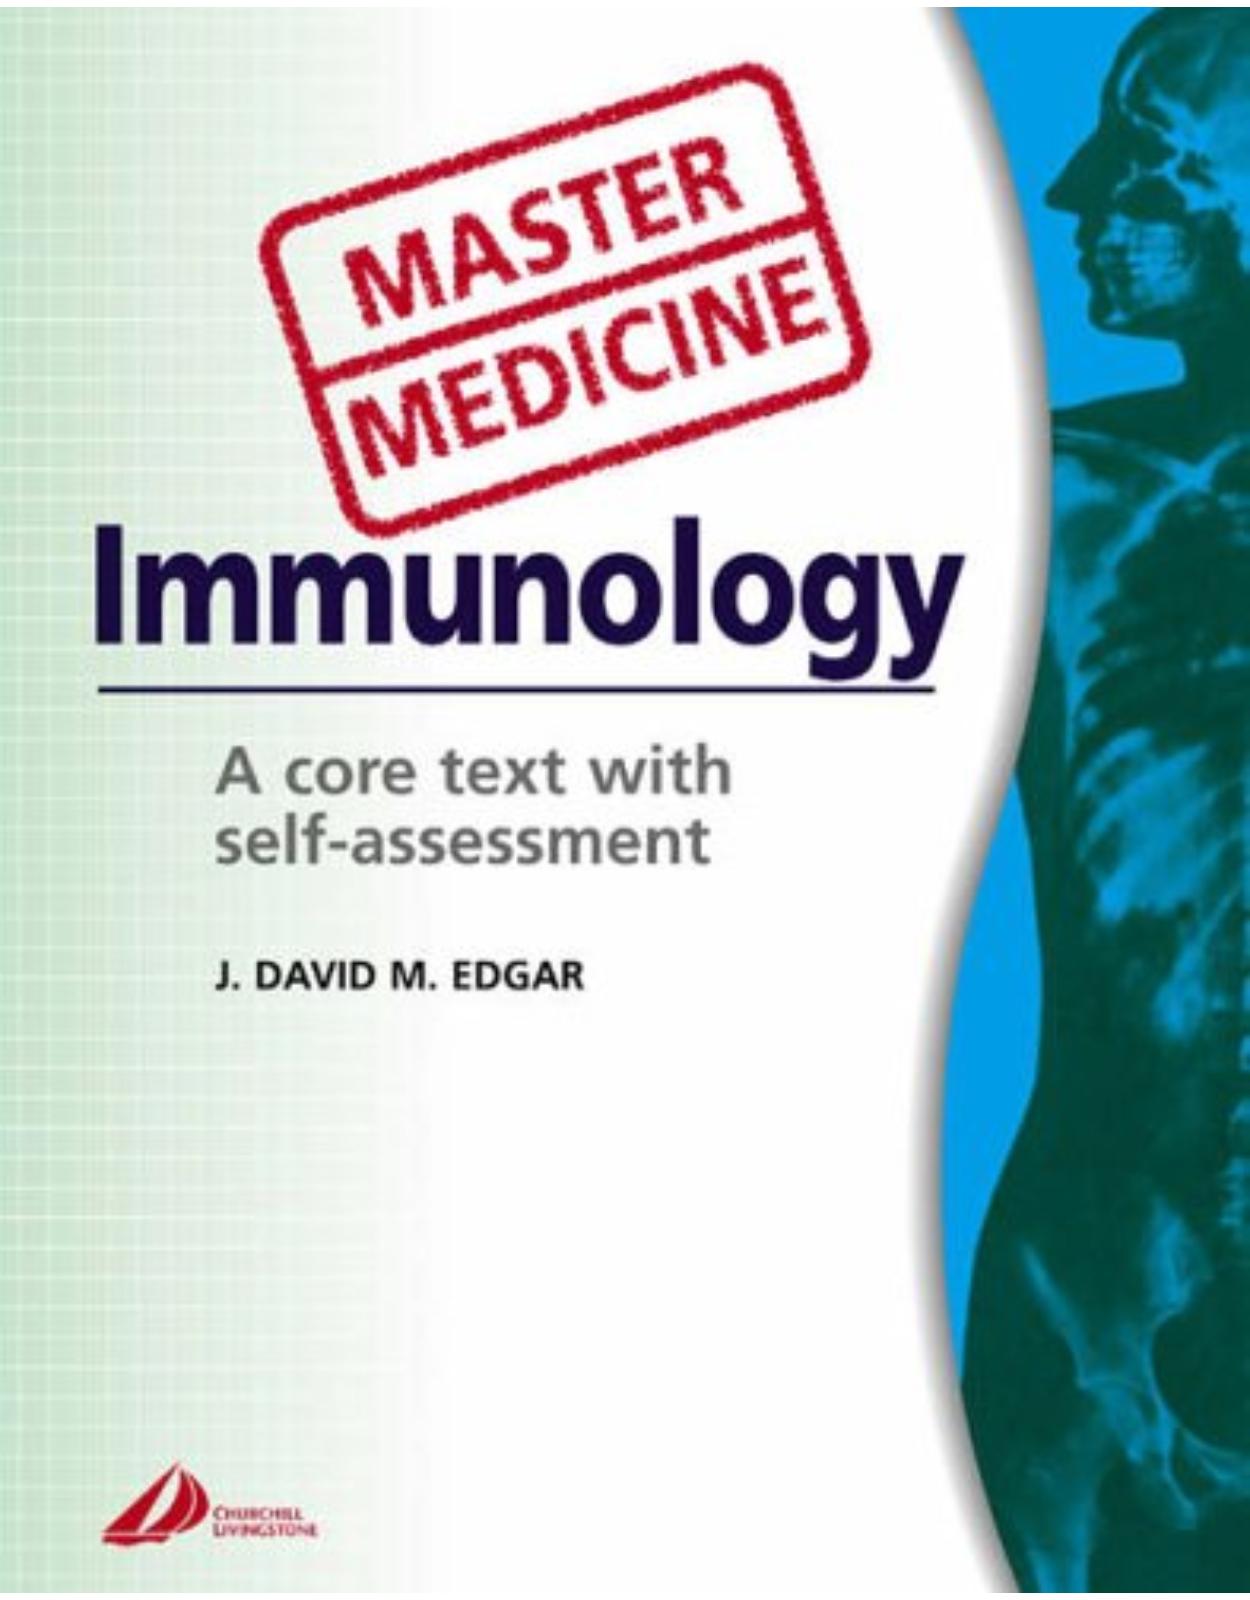 Master Medicine: Immunology, A core text with self-assessment